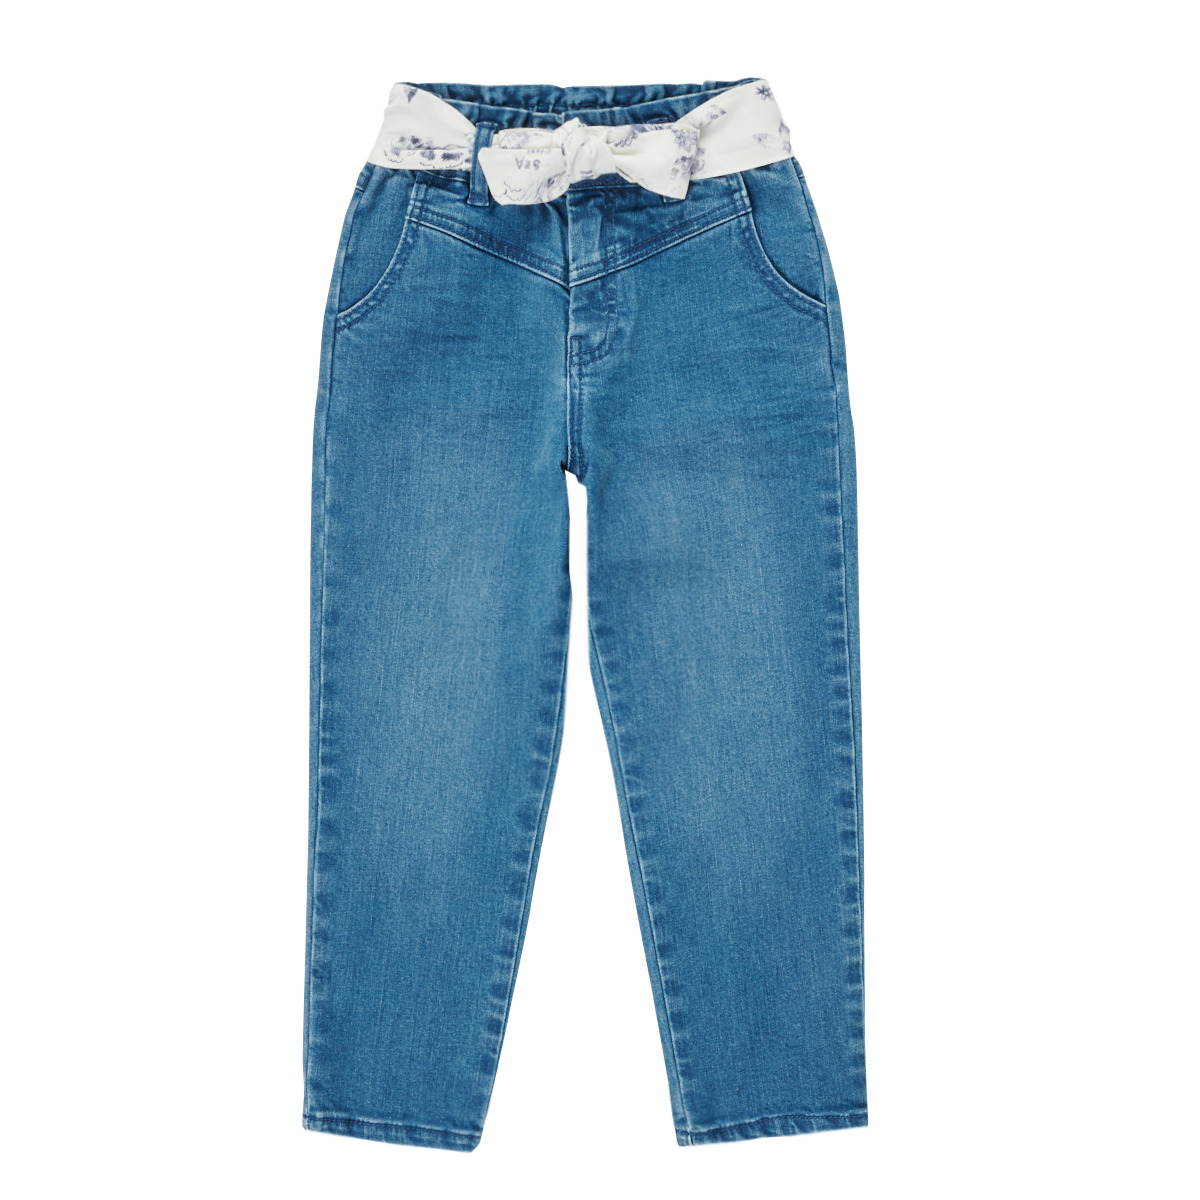 Ikks DOSSUSSET Blue - Fast delivery | Spartoo Europe ! - Clothing straight jeans  Child 64,00 €